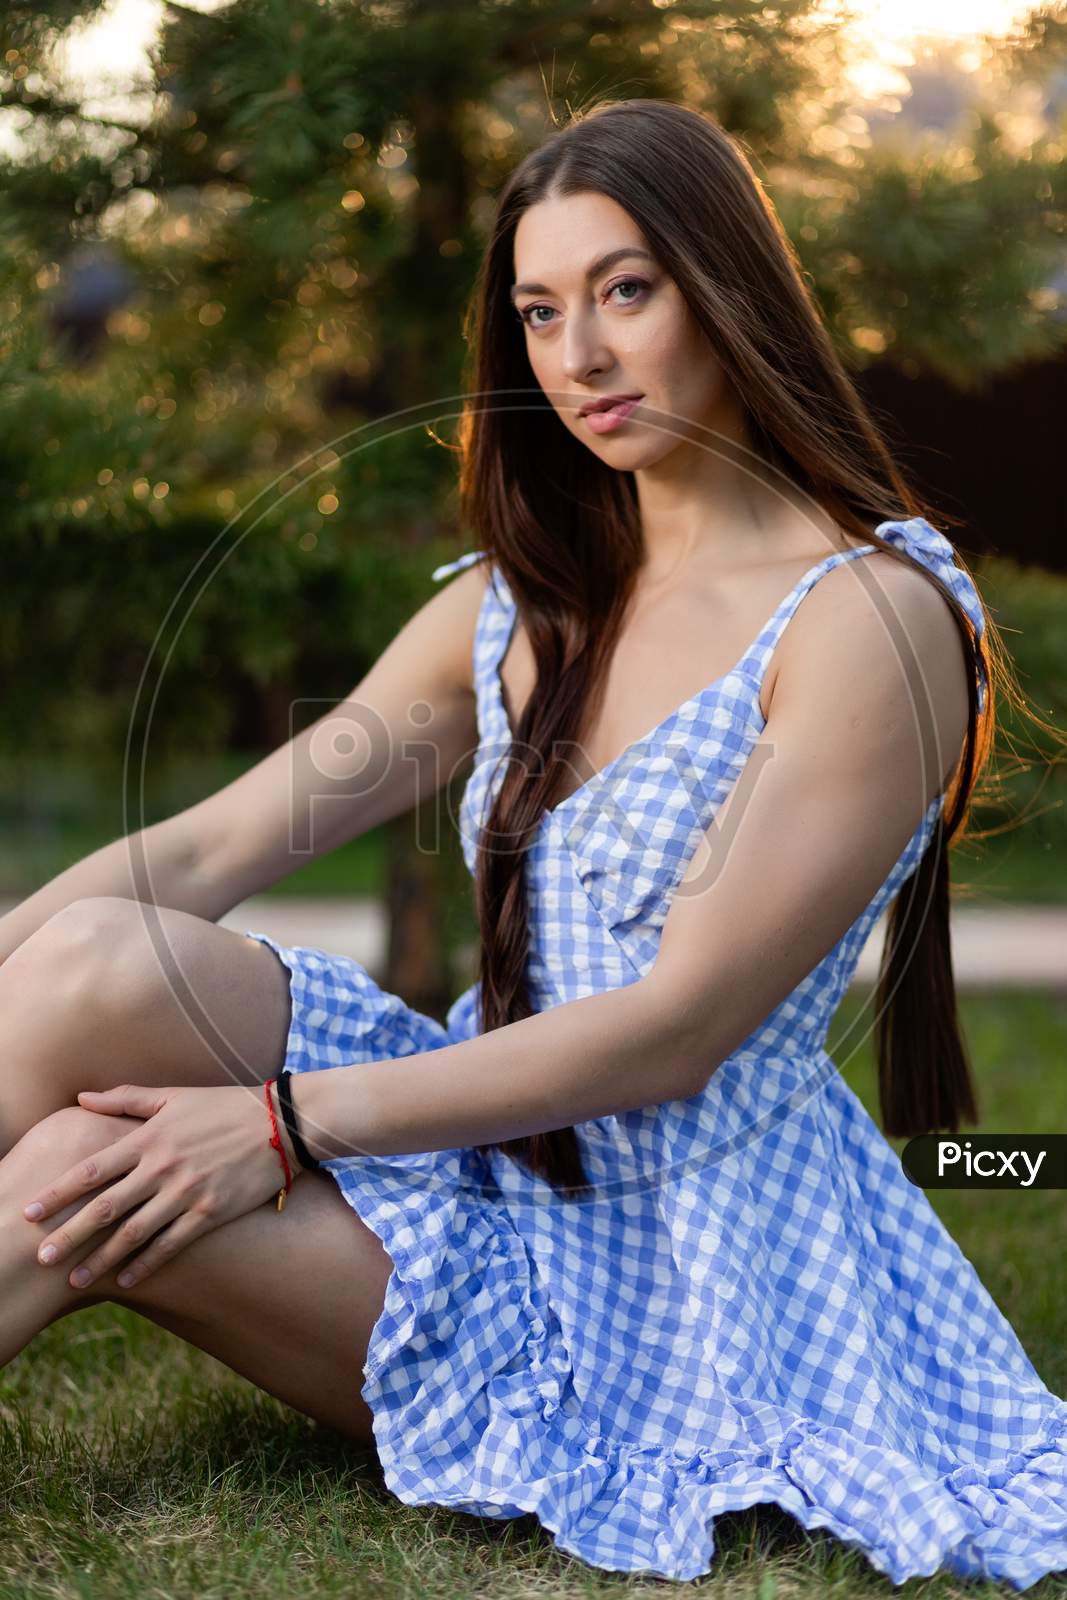 A Young Woman  Sits Relaxed In A Checkered Short Dress   On The Green Grass In The Park On A Warm Day. The Concept Of Summer Vacation In The Village And Live Style